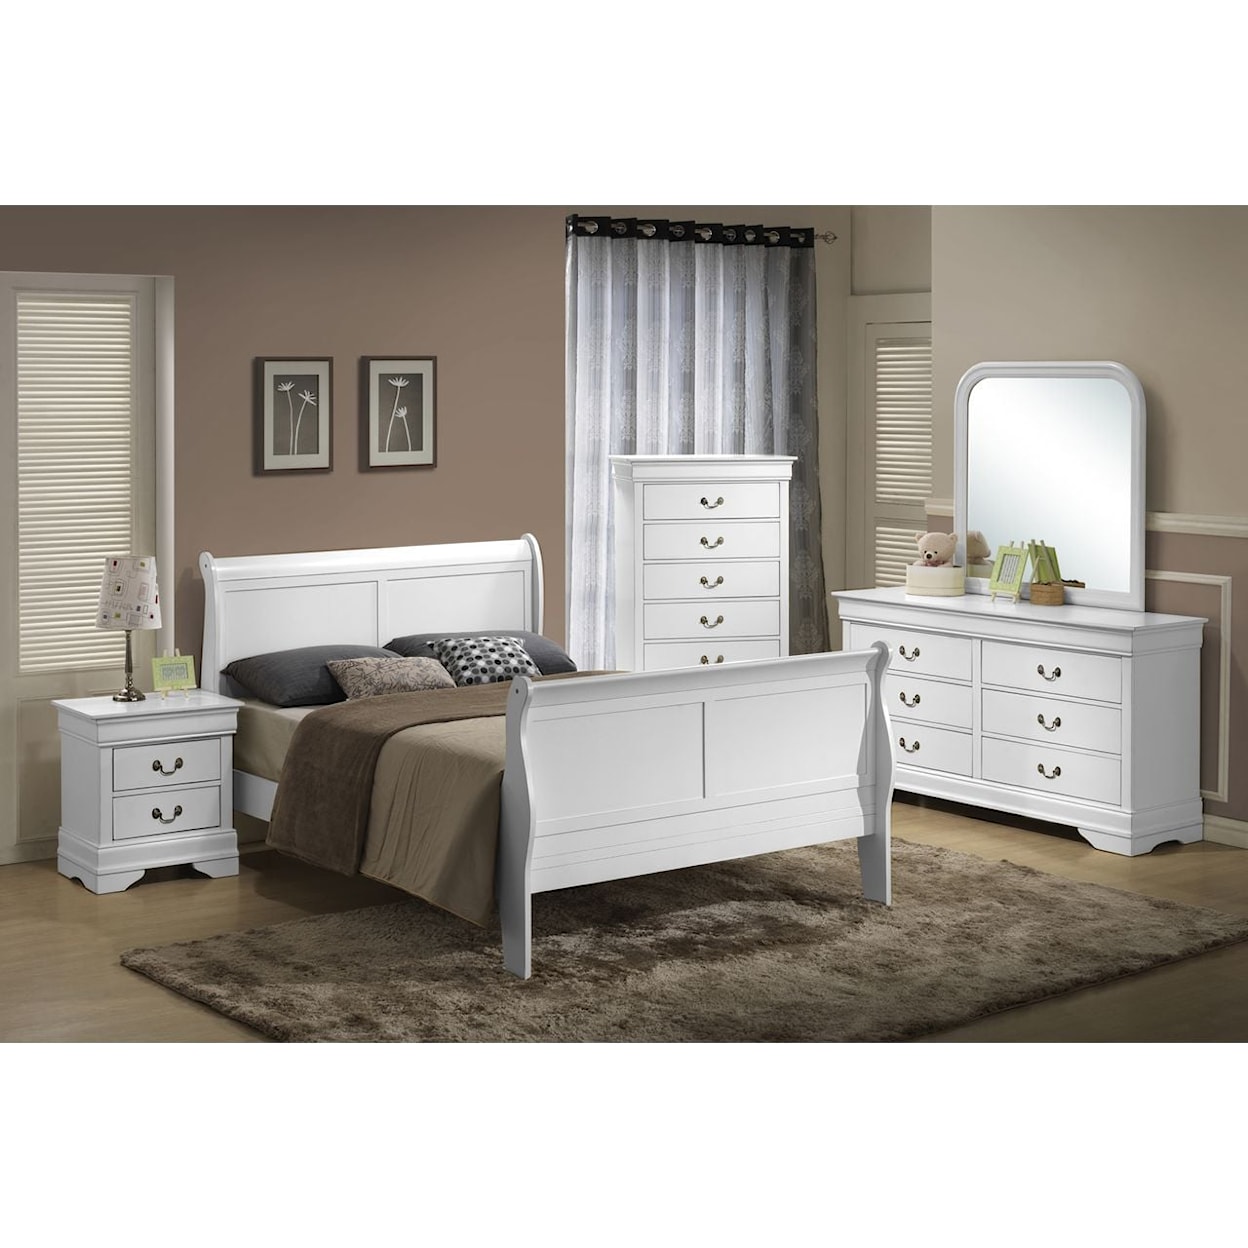 Lifestyle C4936A 5 Piece Full Bedroom Set with Chest